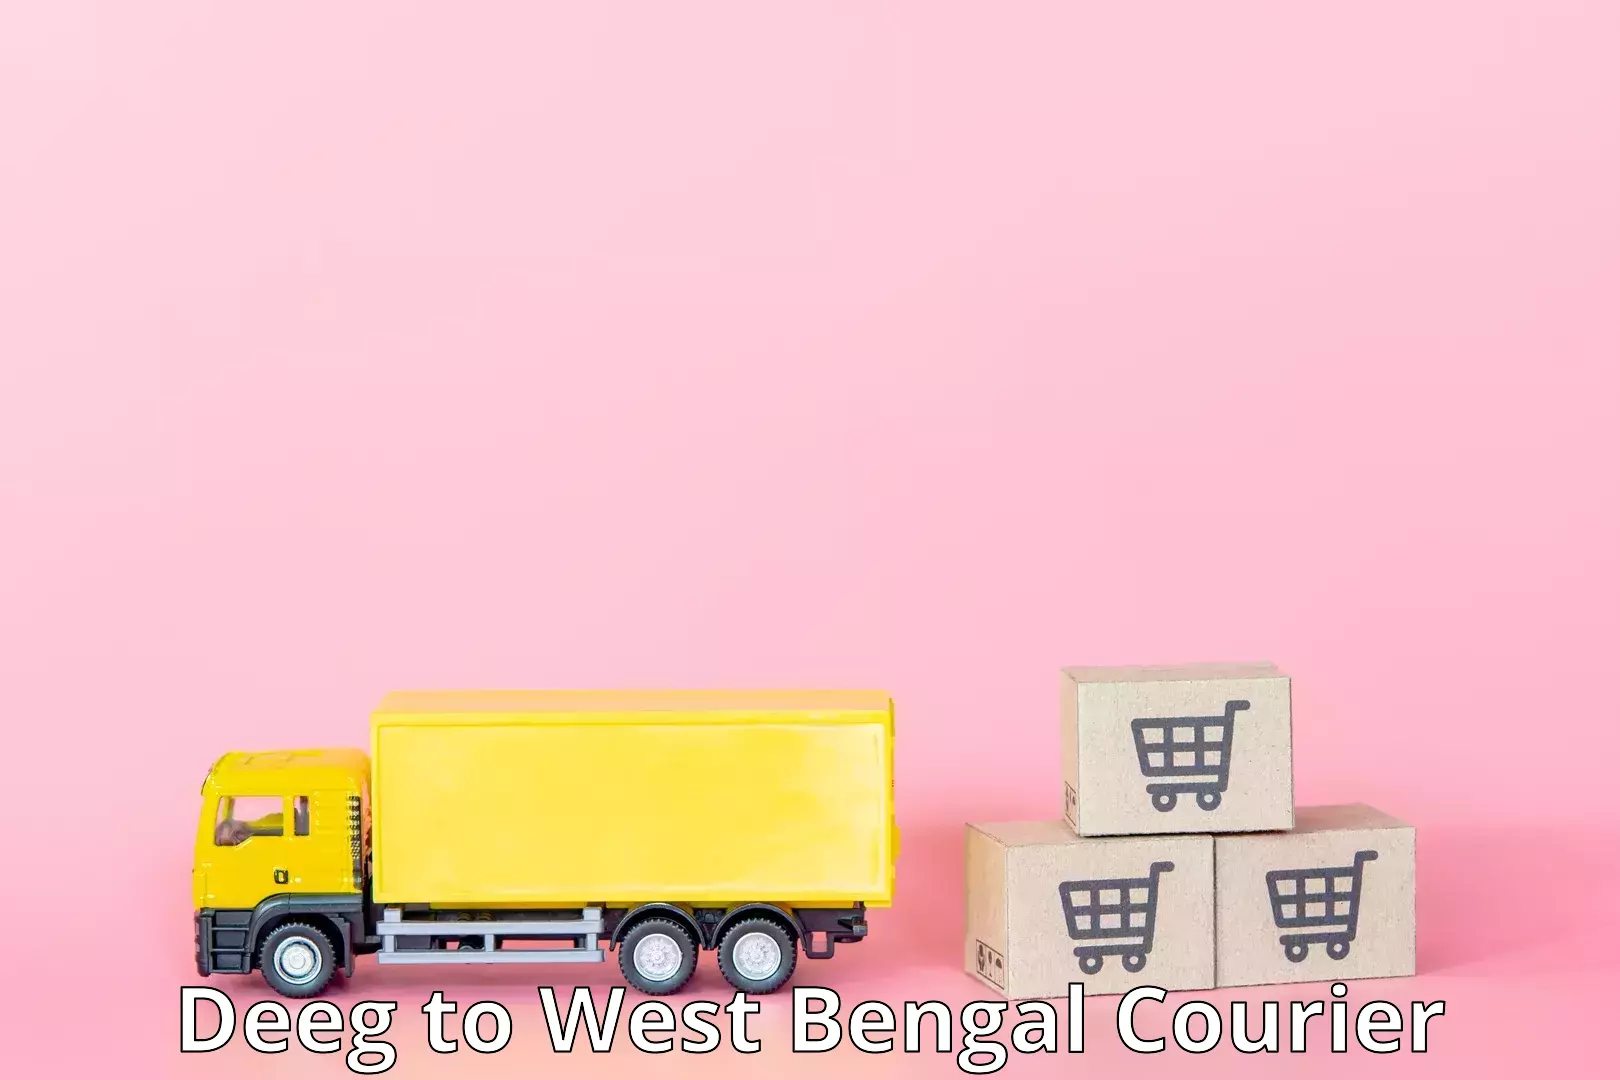 State-of-the-art courier technology Deeg to North 24 Parganas